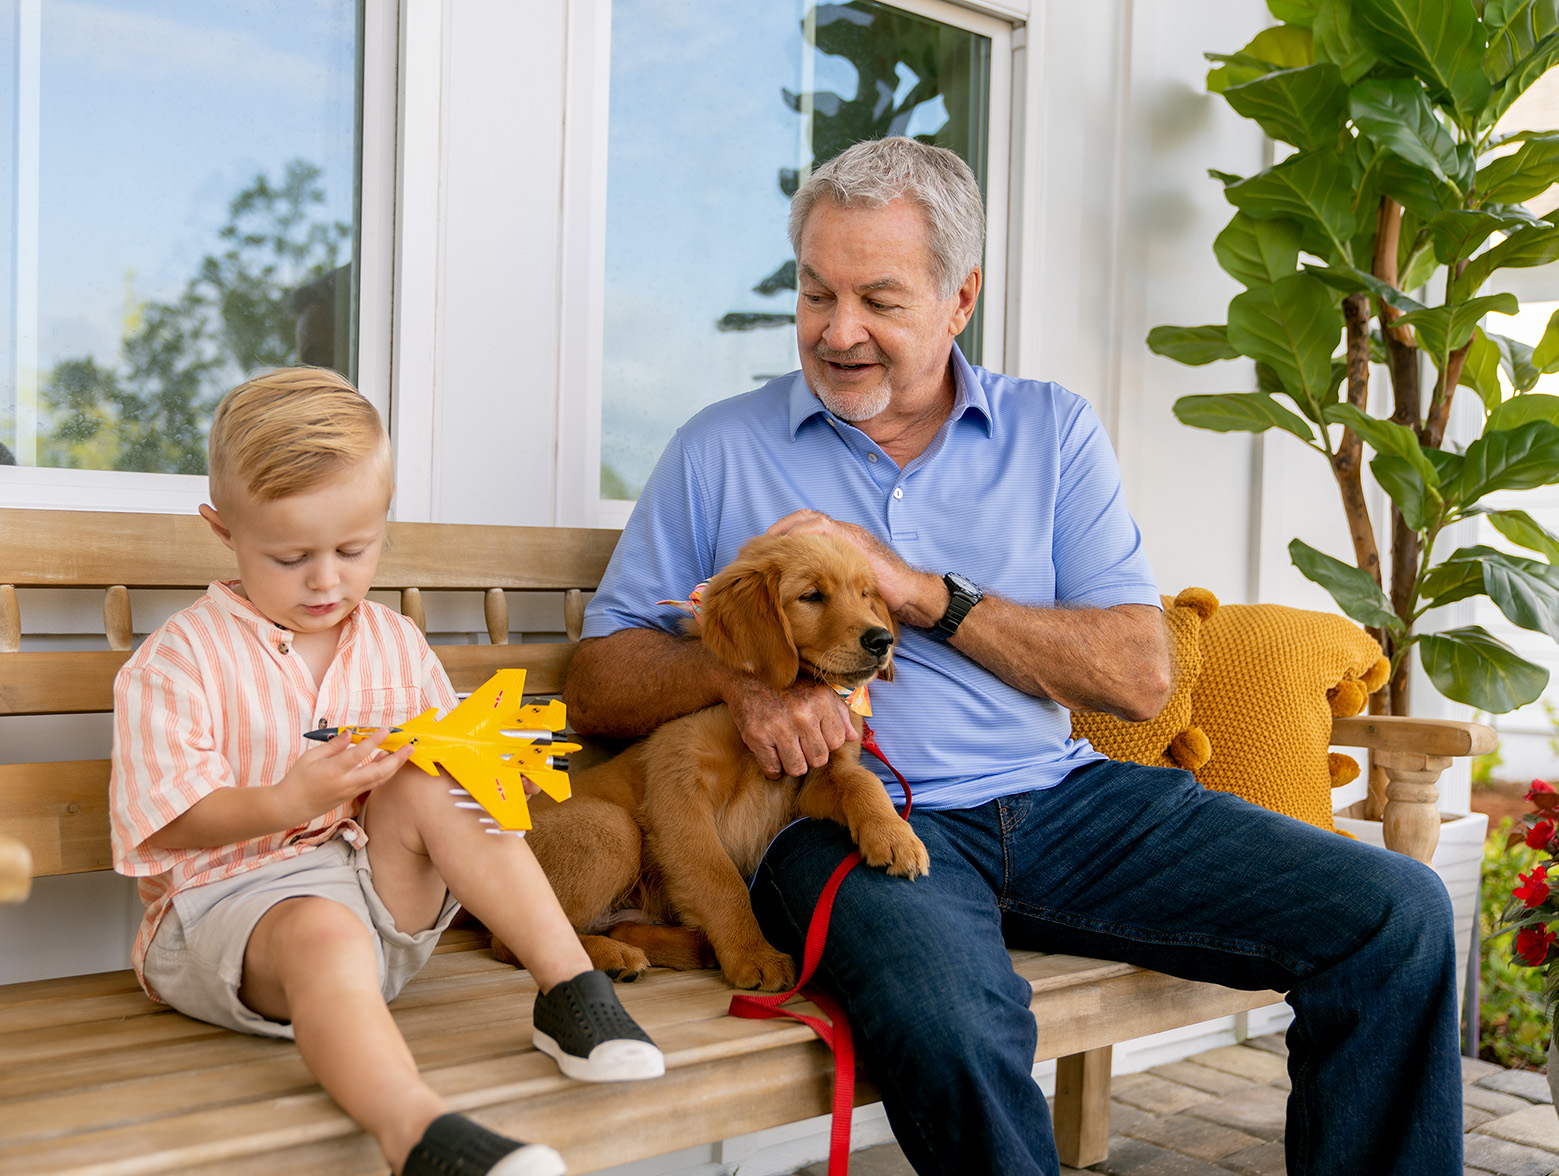 Grandpa, toddler and puppy sit on bench.